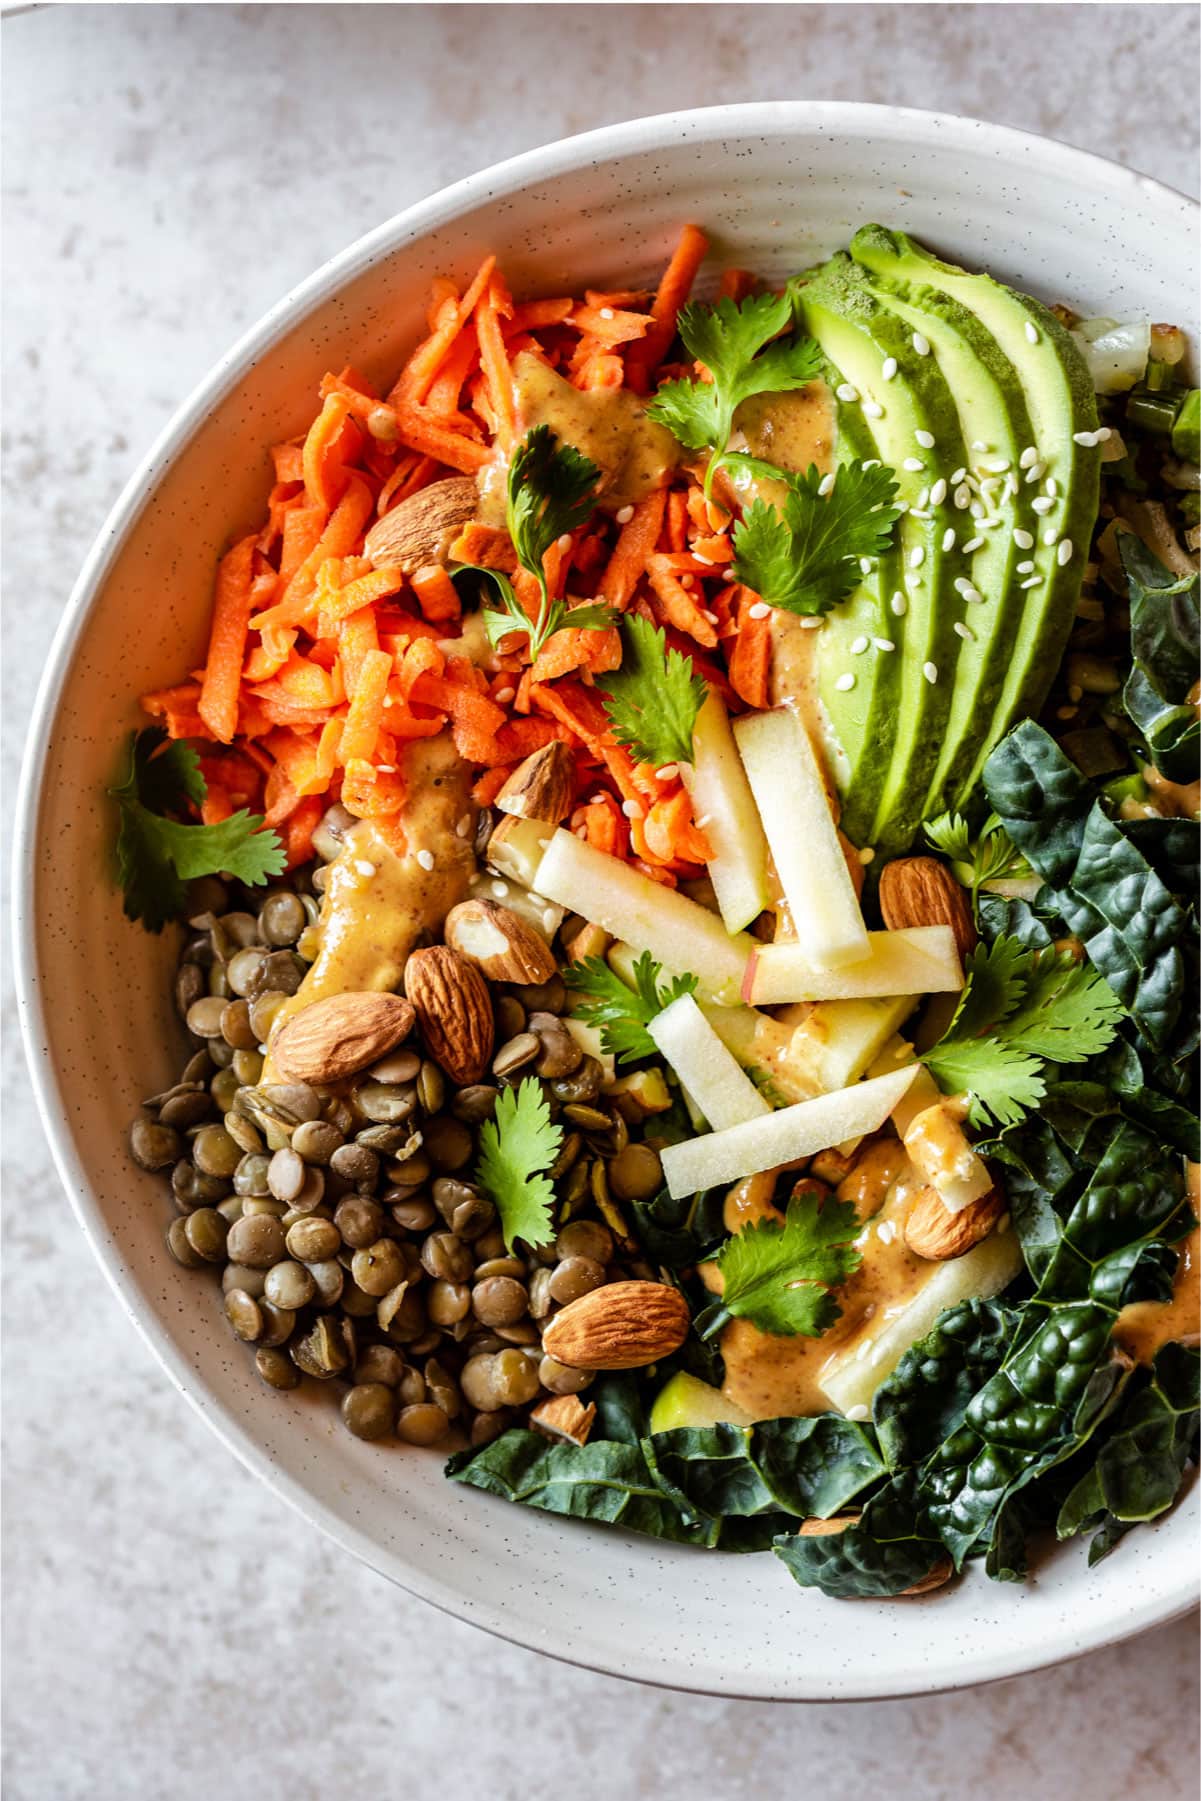 Nourishing Kale and Lentil Bowl with Pickled Carrots and Thai Almond Sauce | The Crooked Carrot